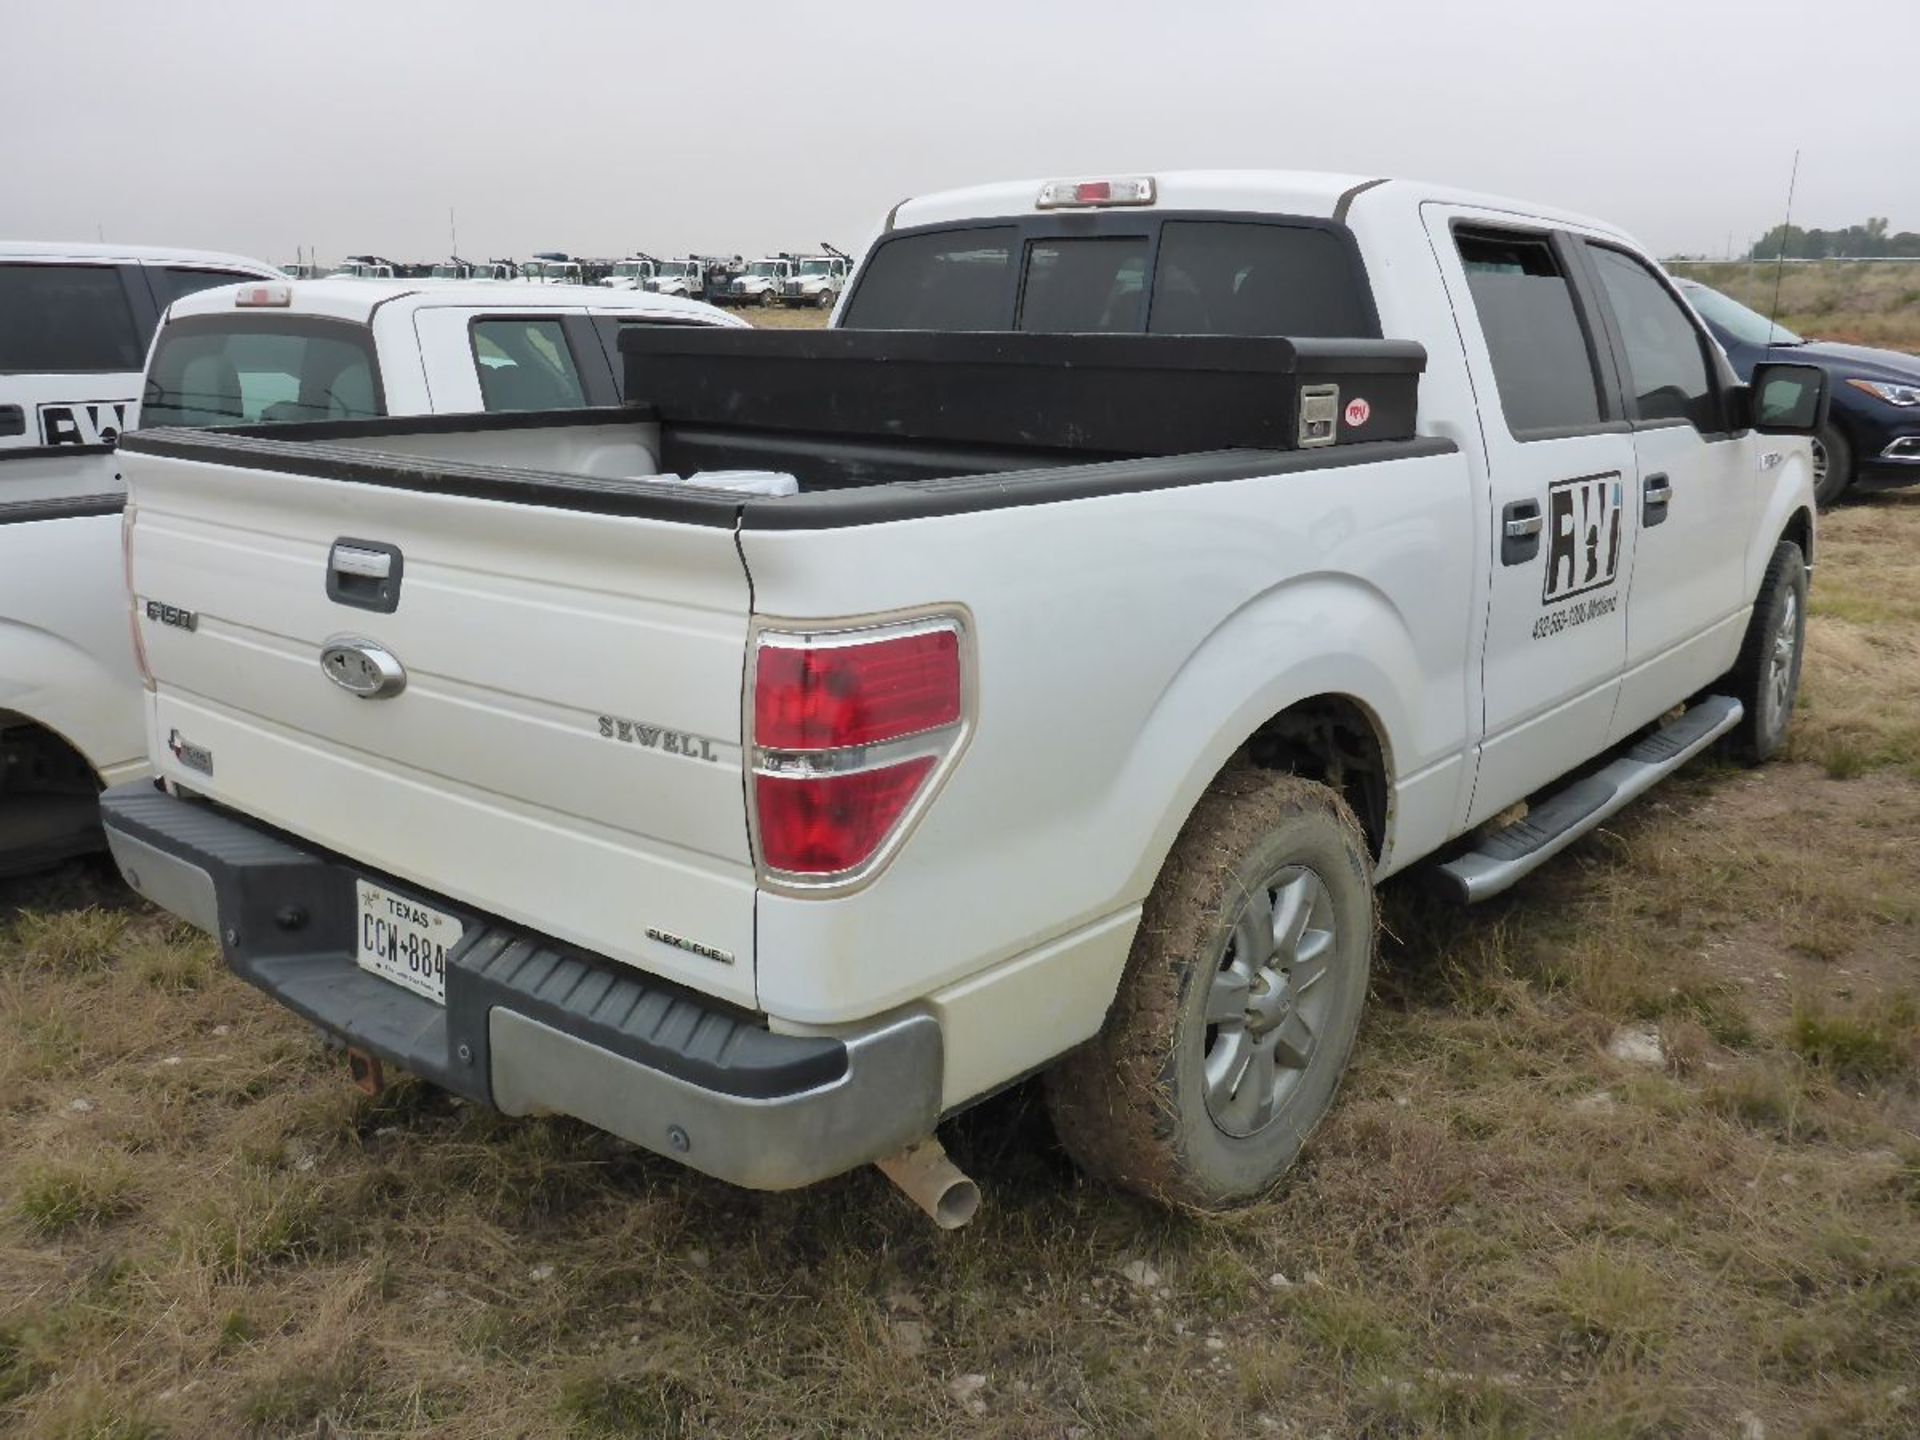 2013 Ford Model F150 XL 1/2 Ton Gasoline Pickup Truck - Image 2 of 4